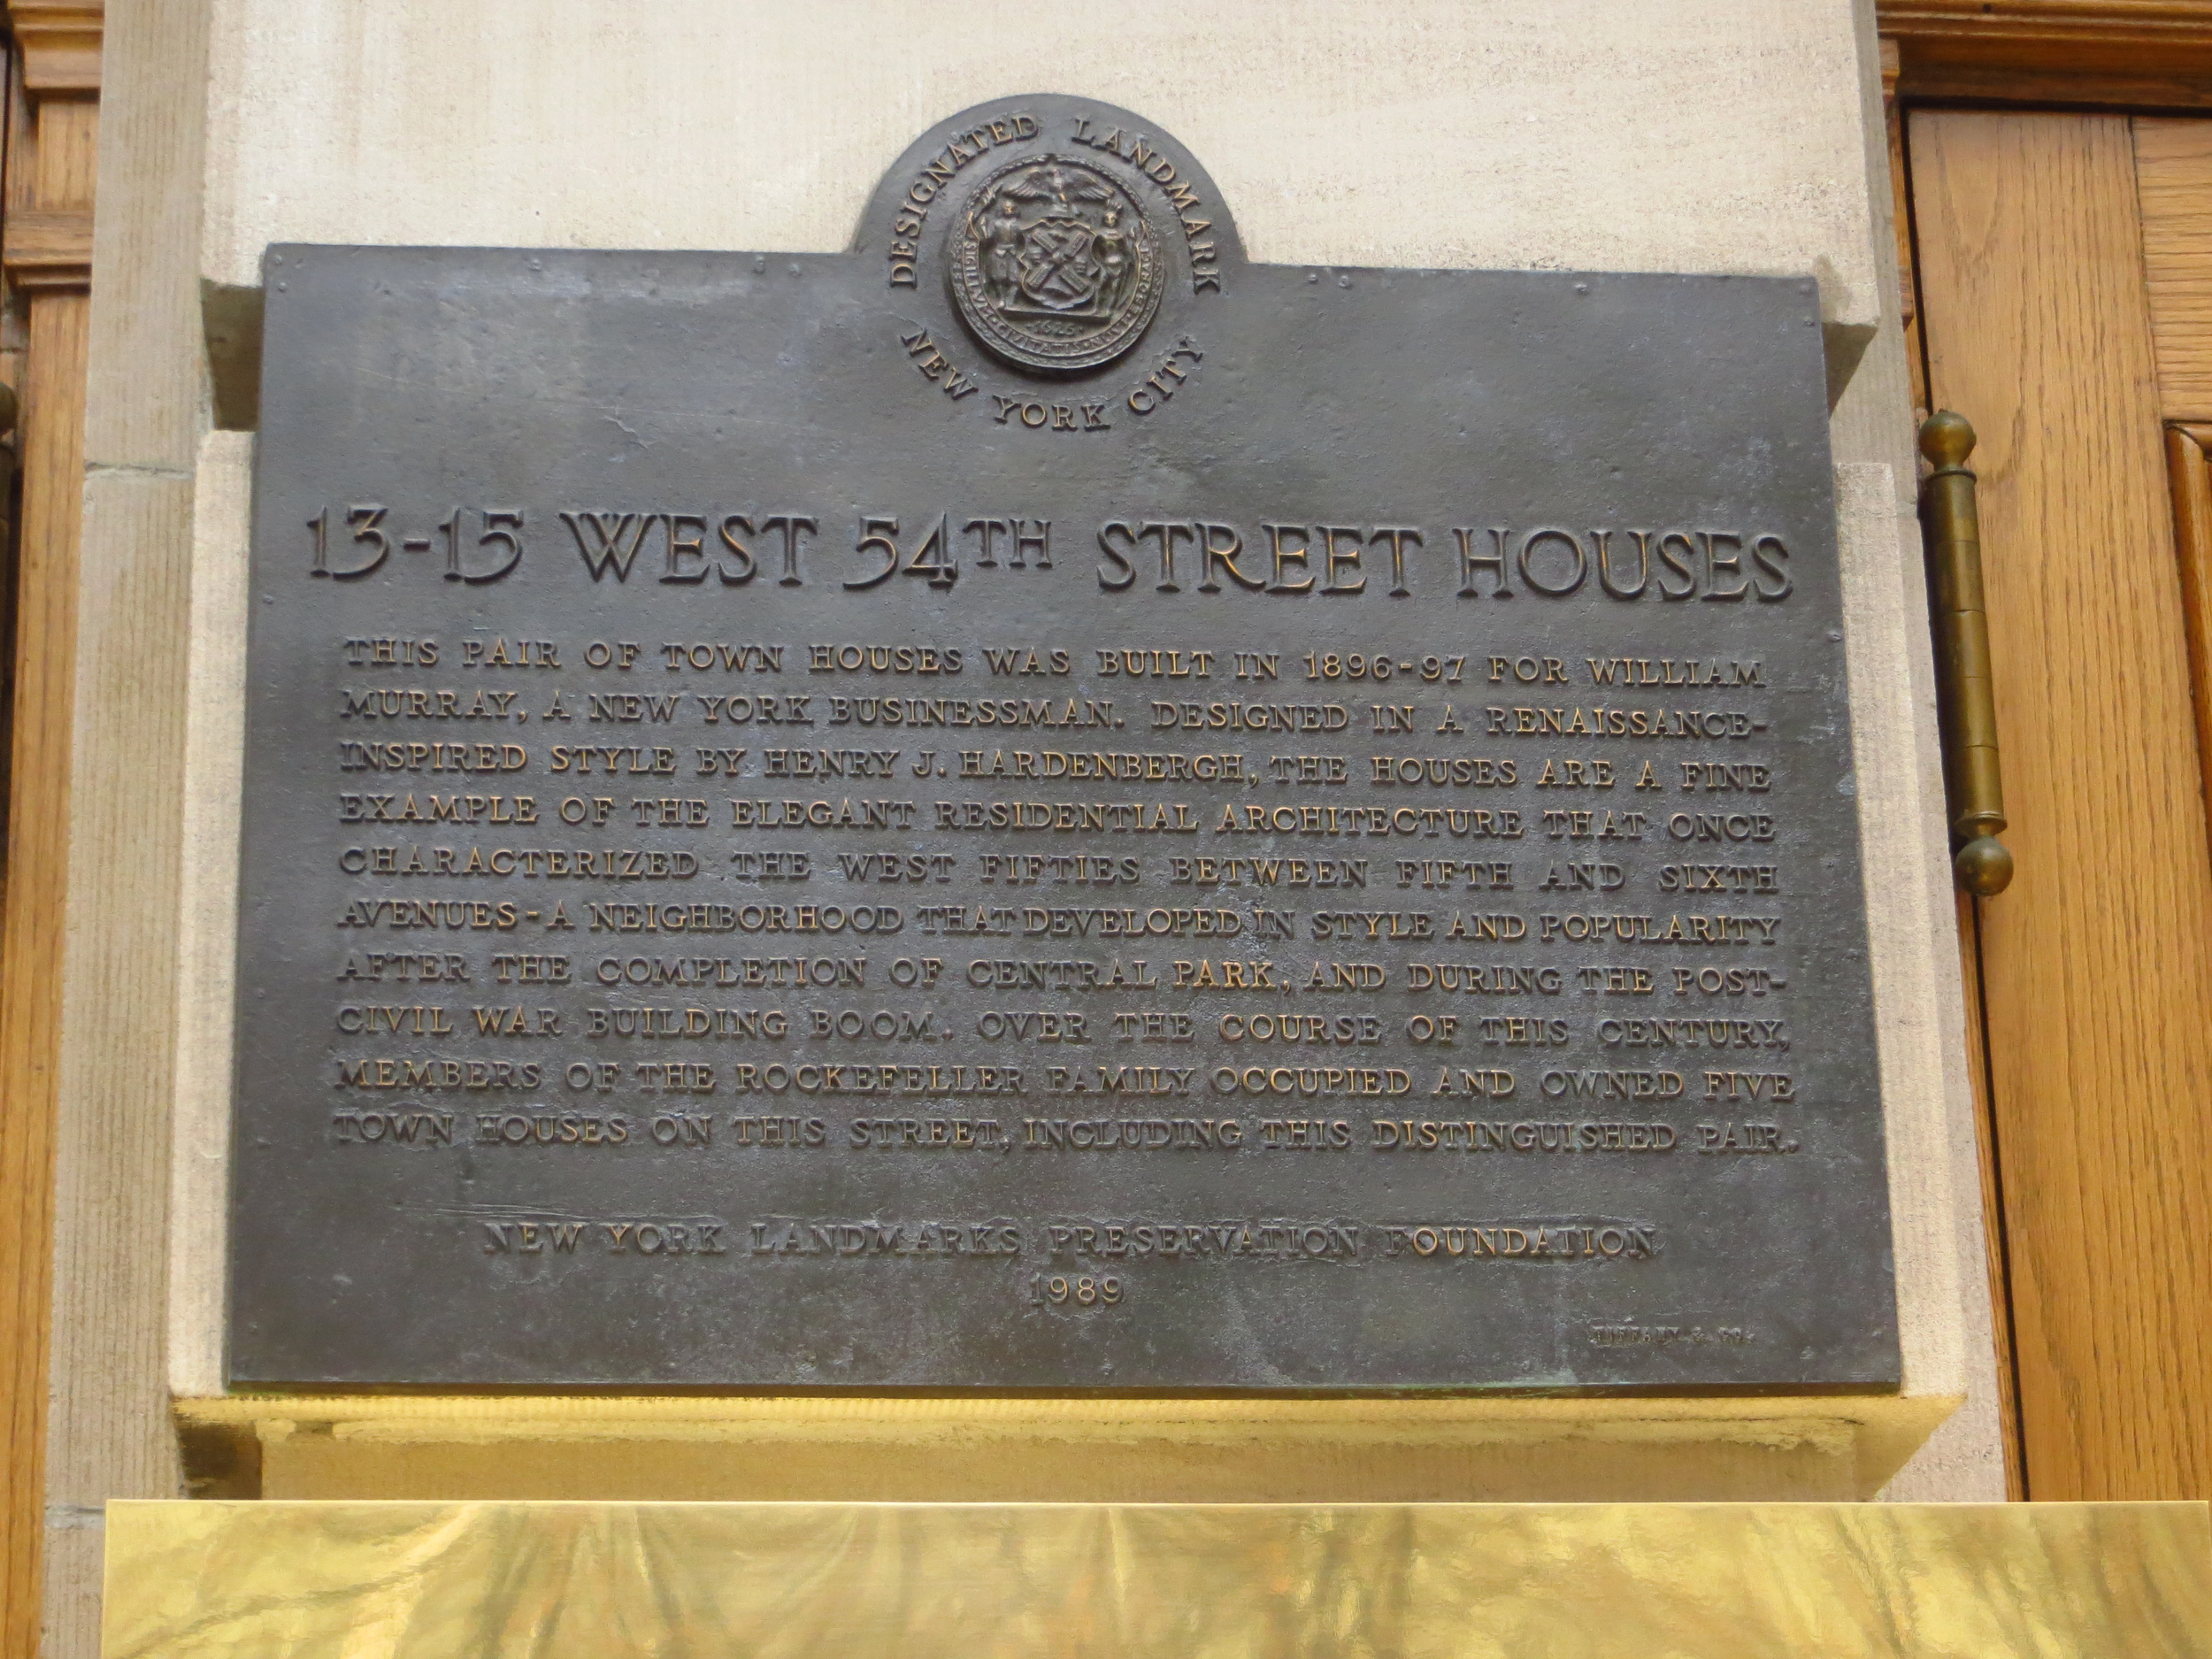 54th St. House Histories